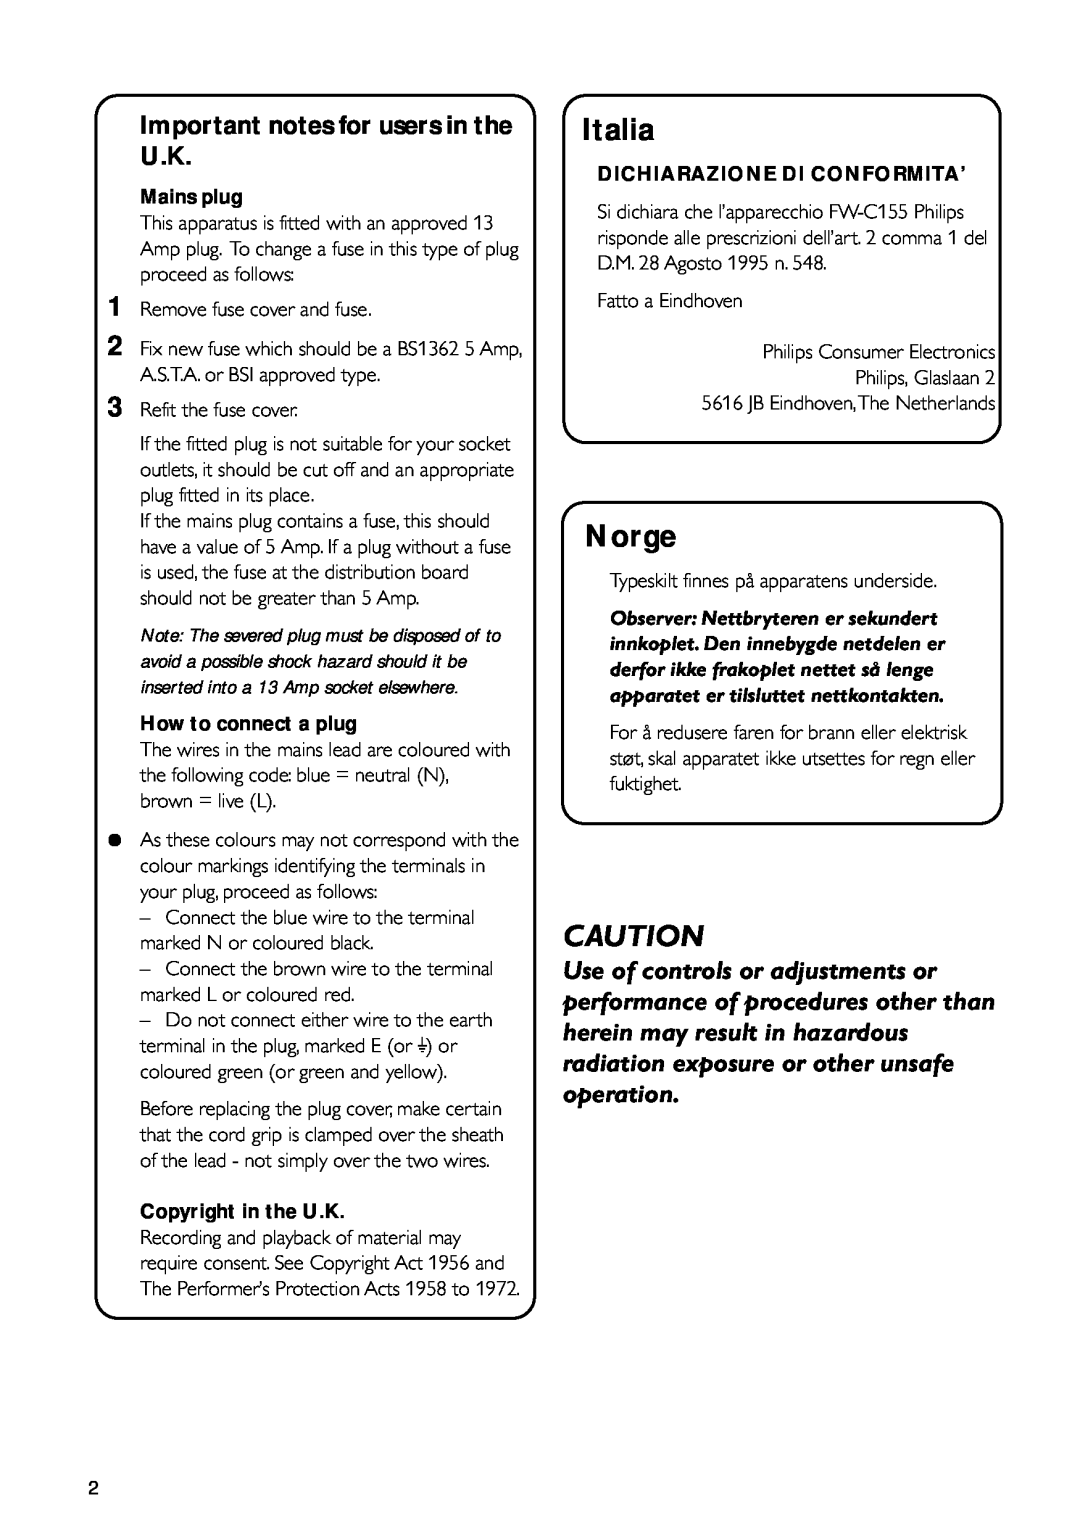 Motorola FW-C155 Important notes for users in the U.K, Mains plug, How to connect a plug, Copyright in the U.K, Italia 